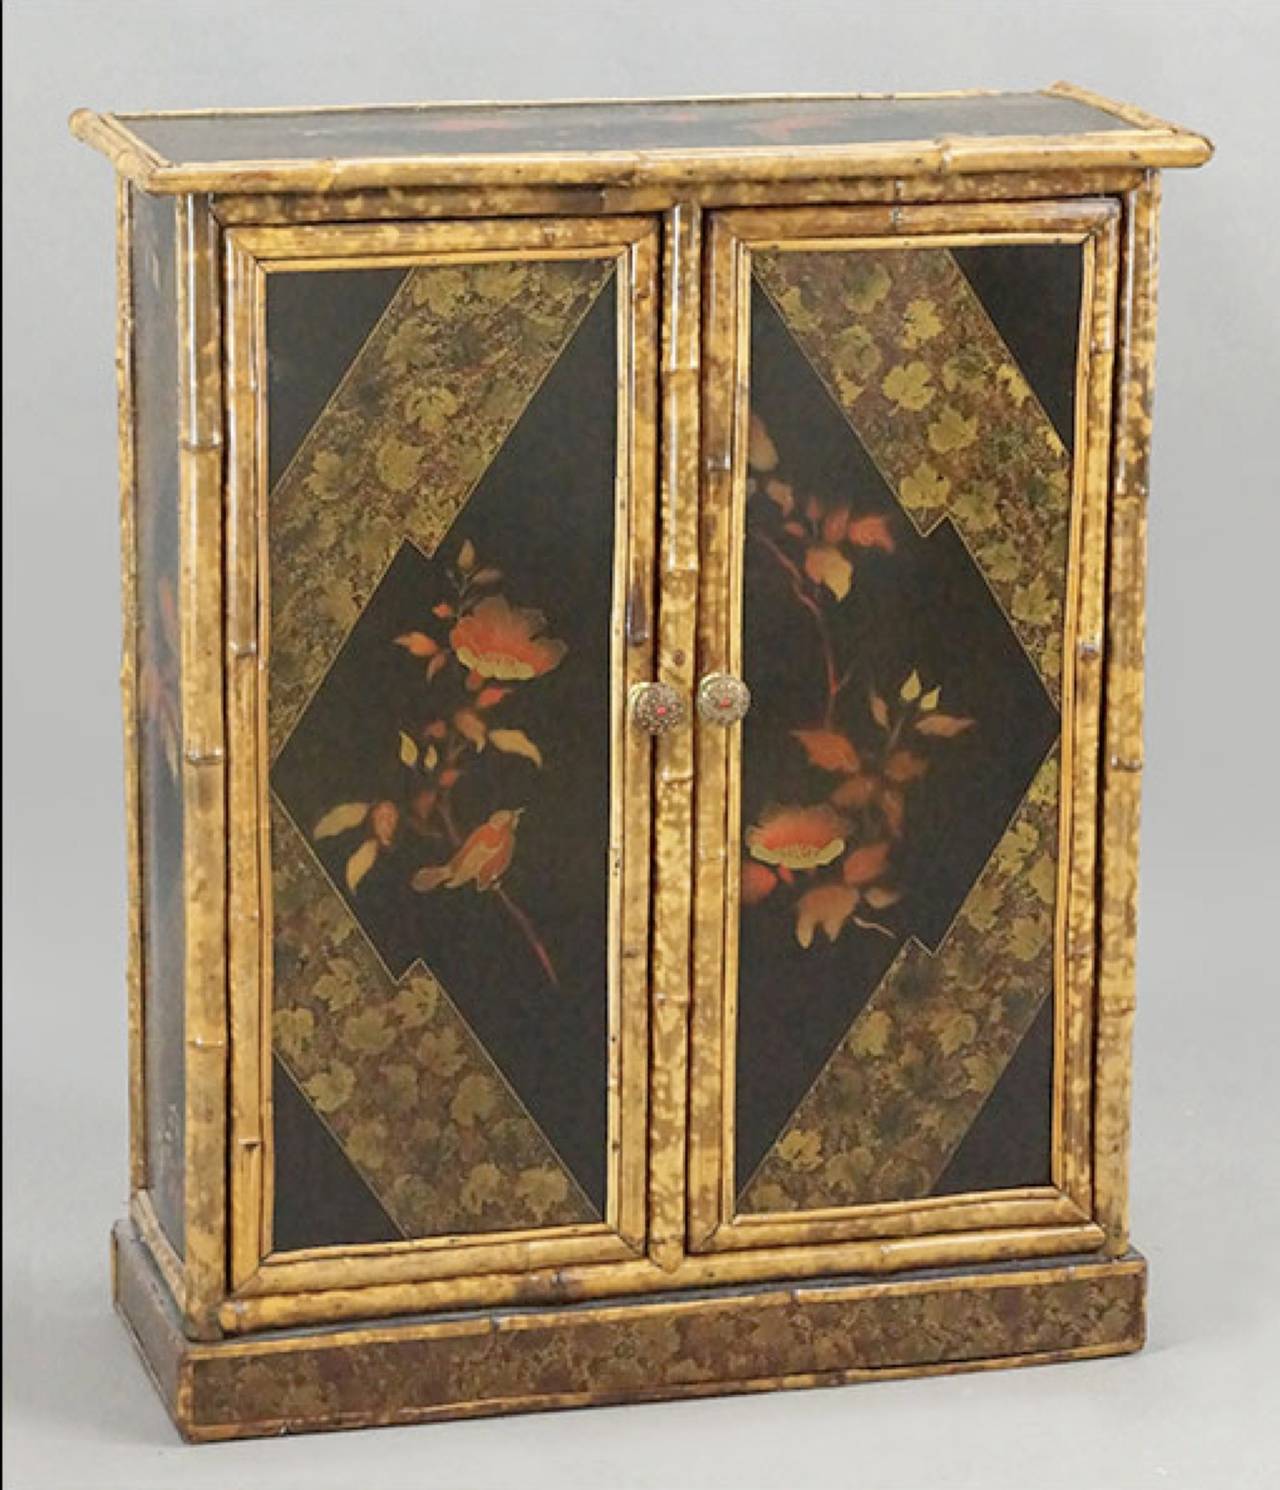 Handsome 19th century English bamboo and chinoiserie cabinet.